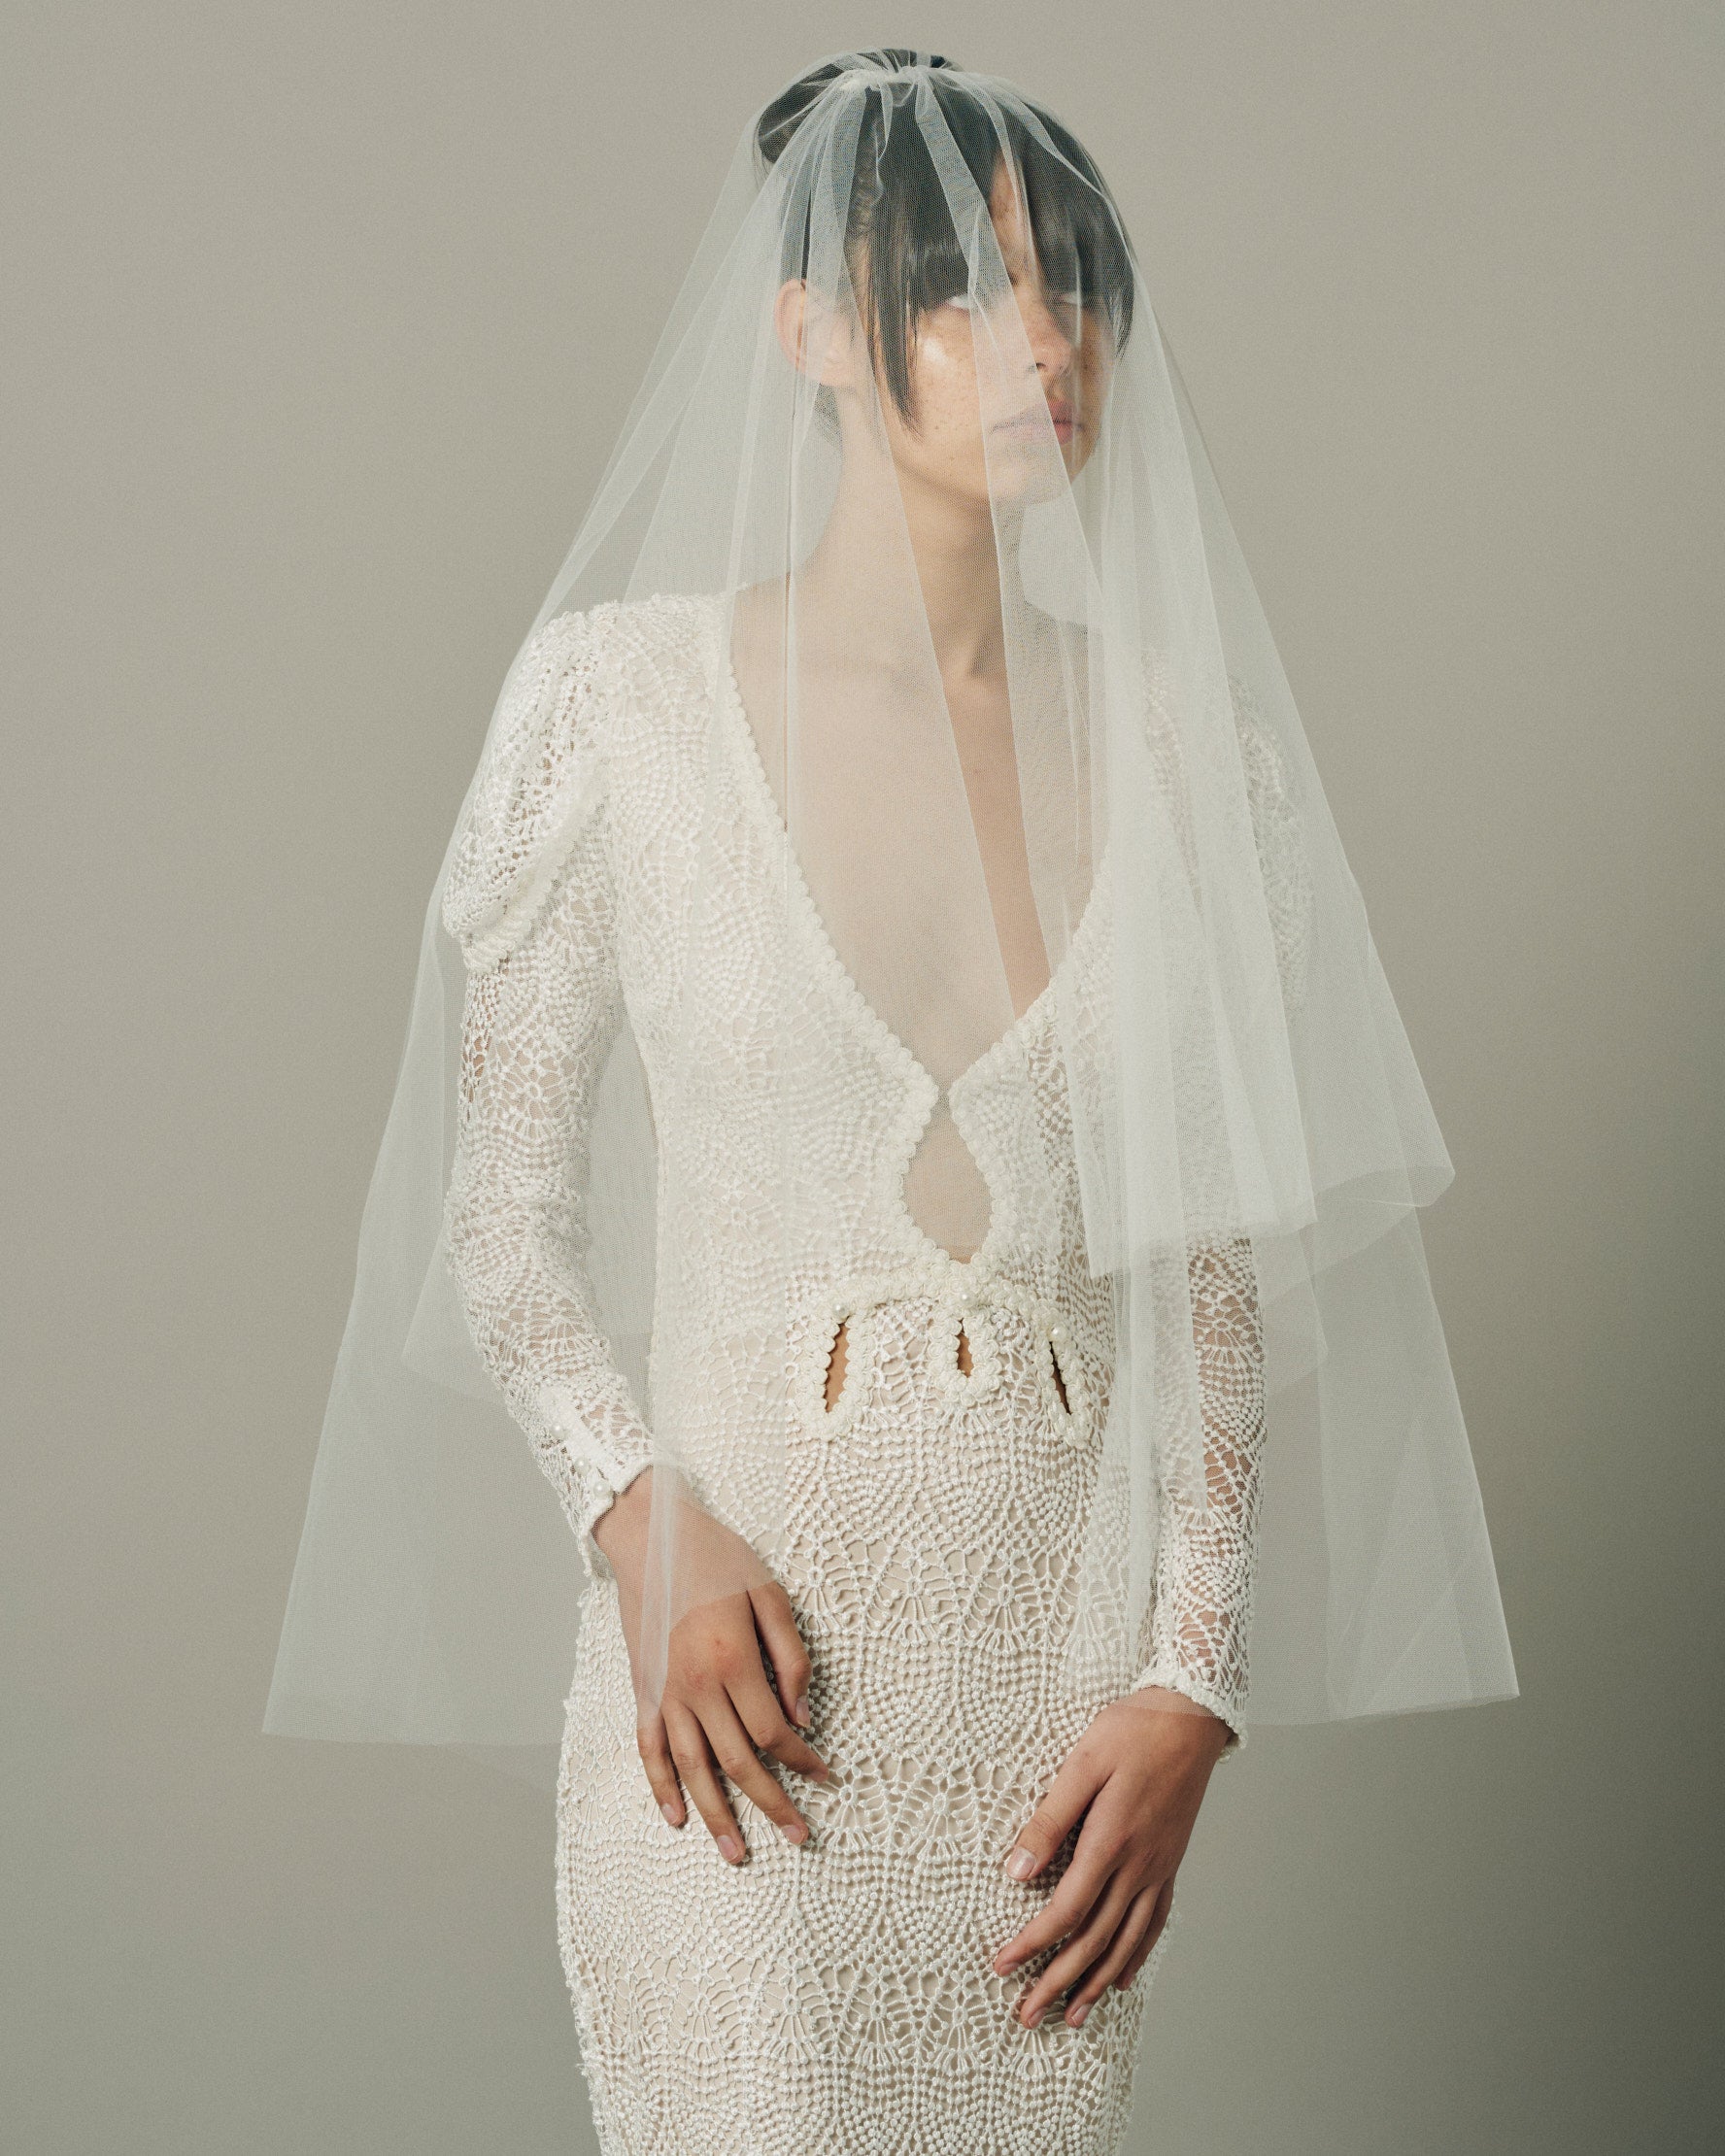 Adora by Simona Wedding Veils - Raw- Edge 2-Tier Fingertip Bridal Veil - Available in White, Off-White and Ivory White